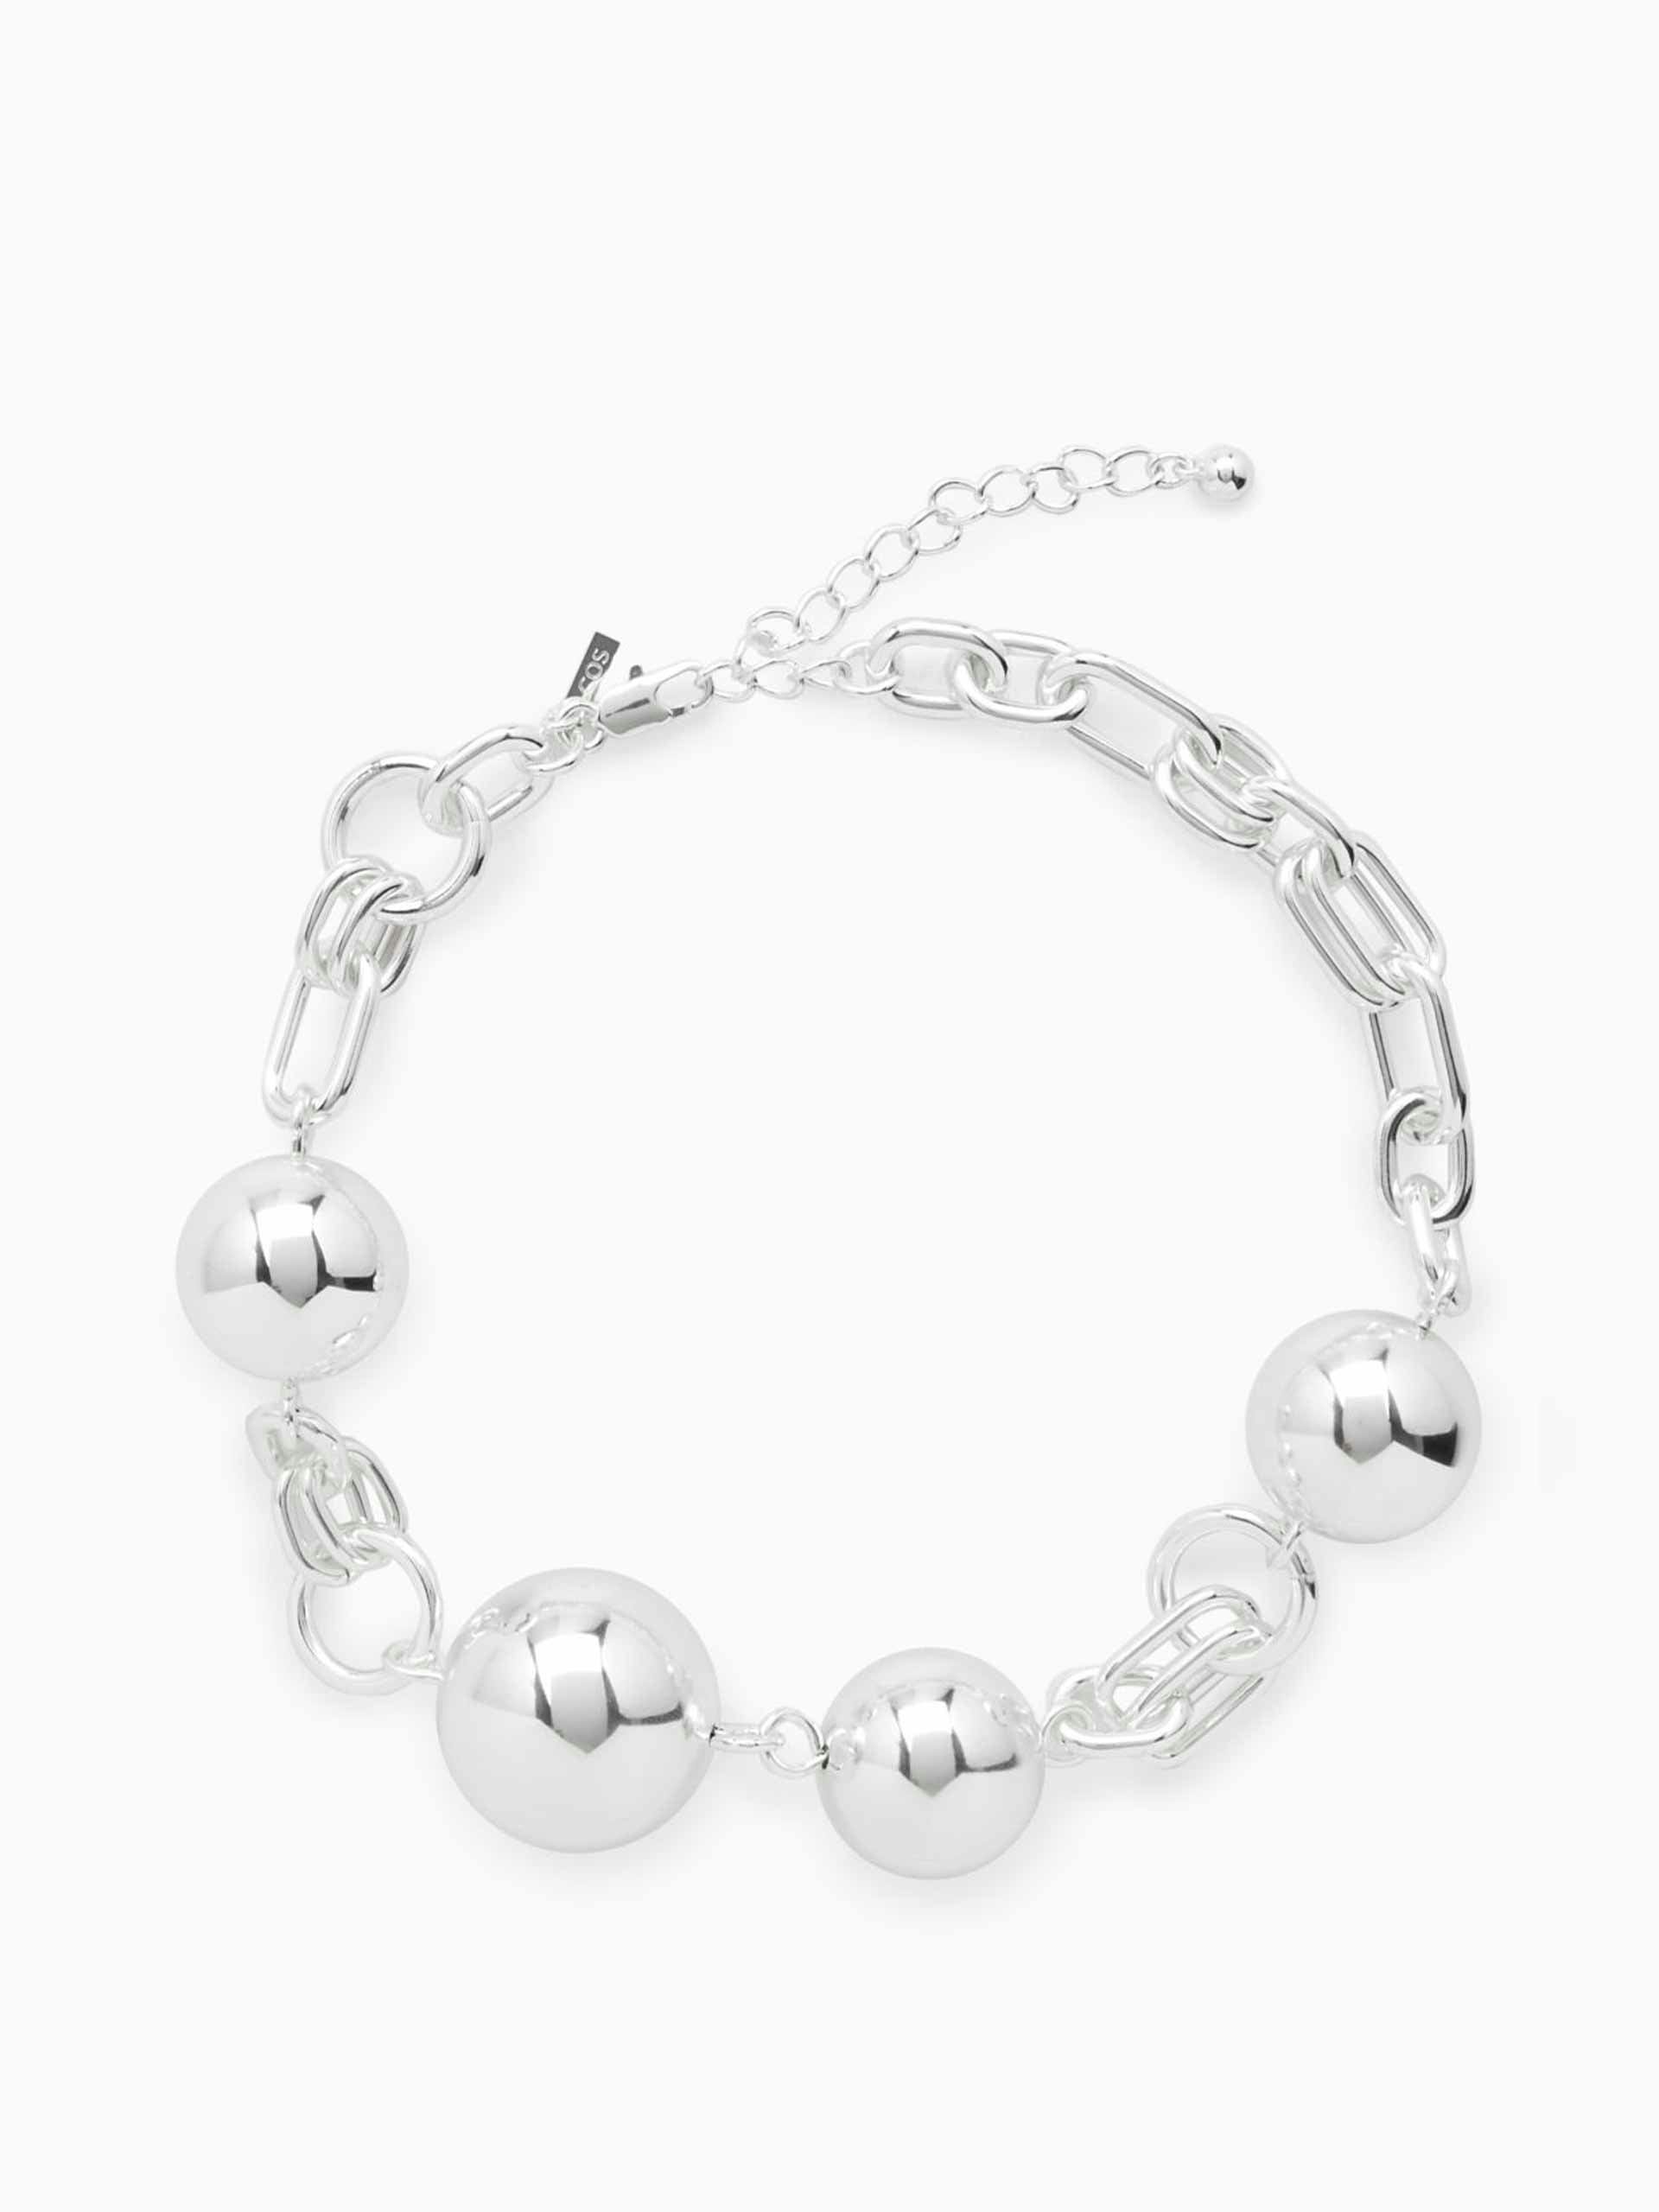 Oversized spherical chain necklace